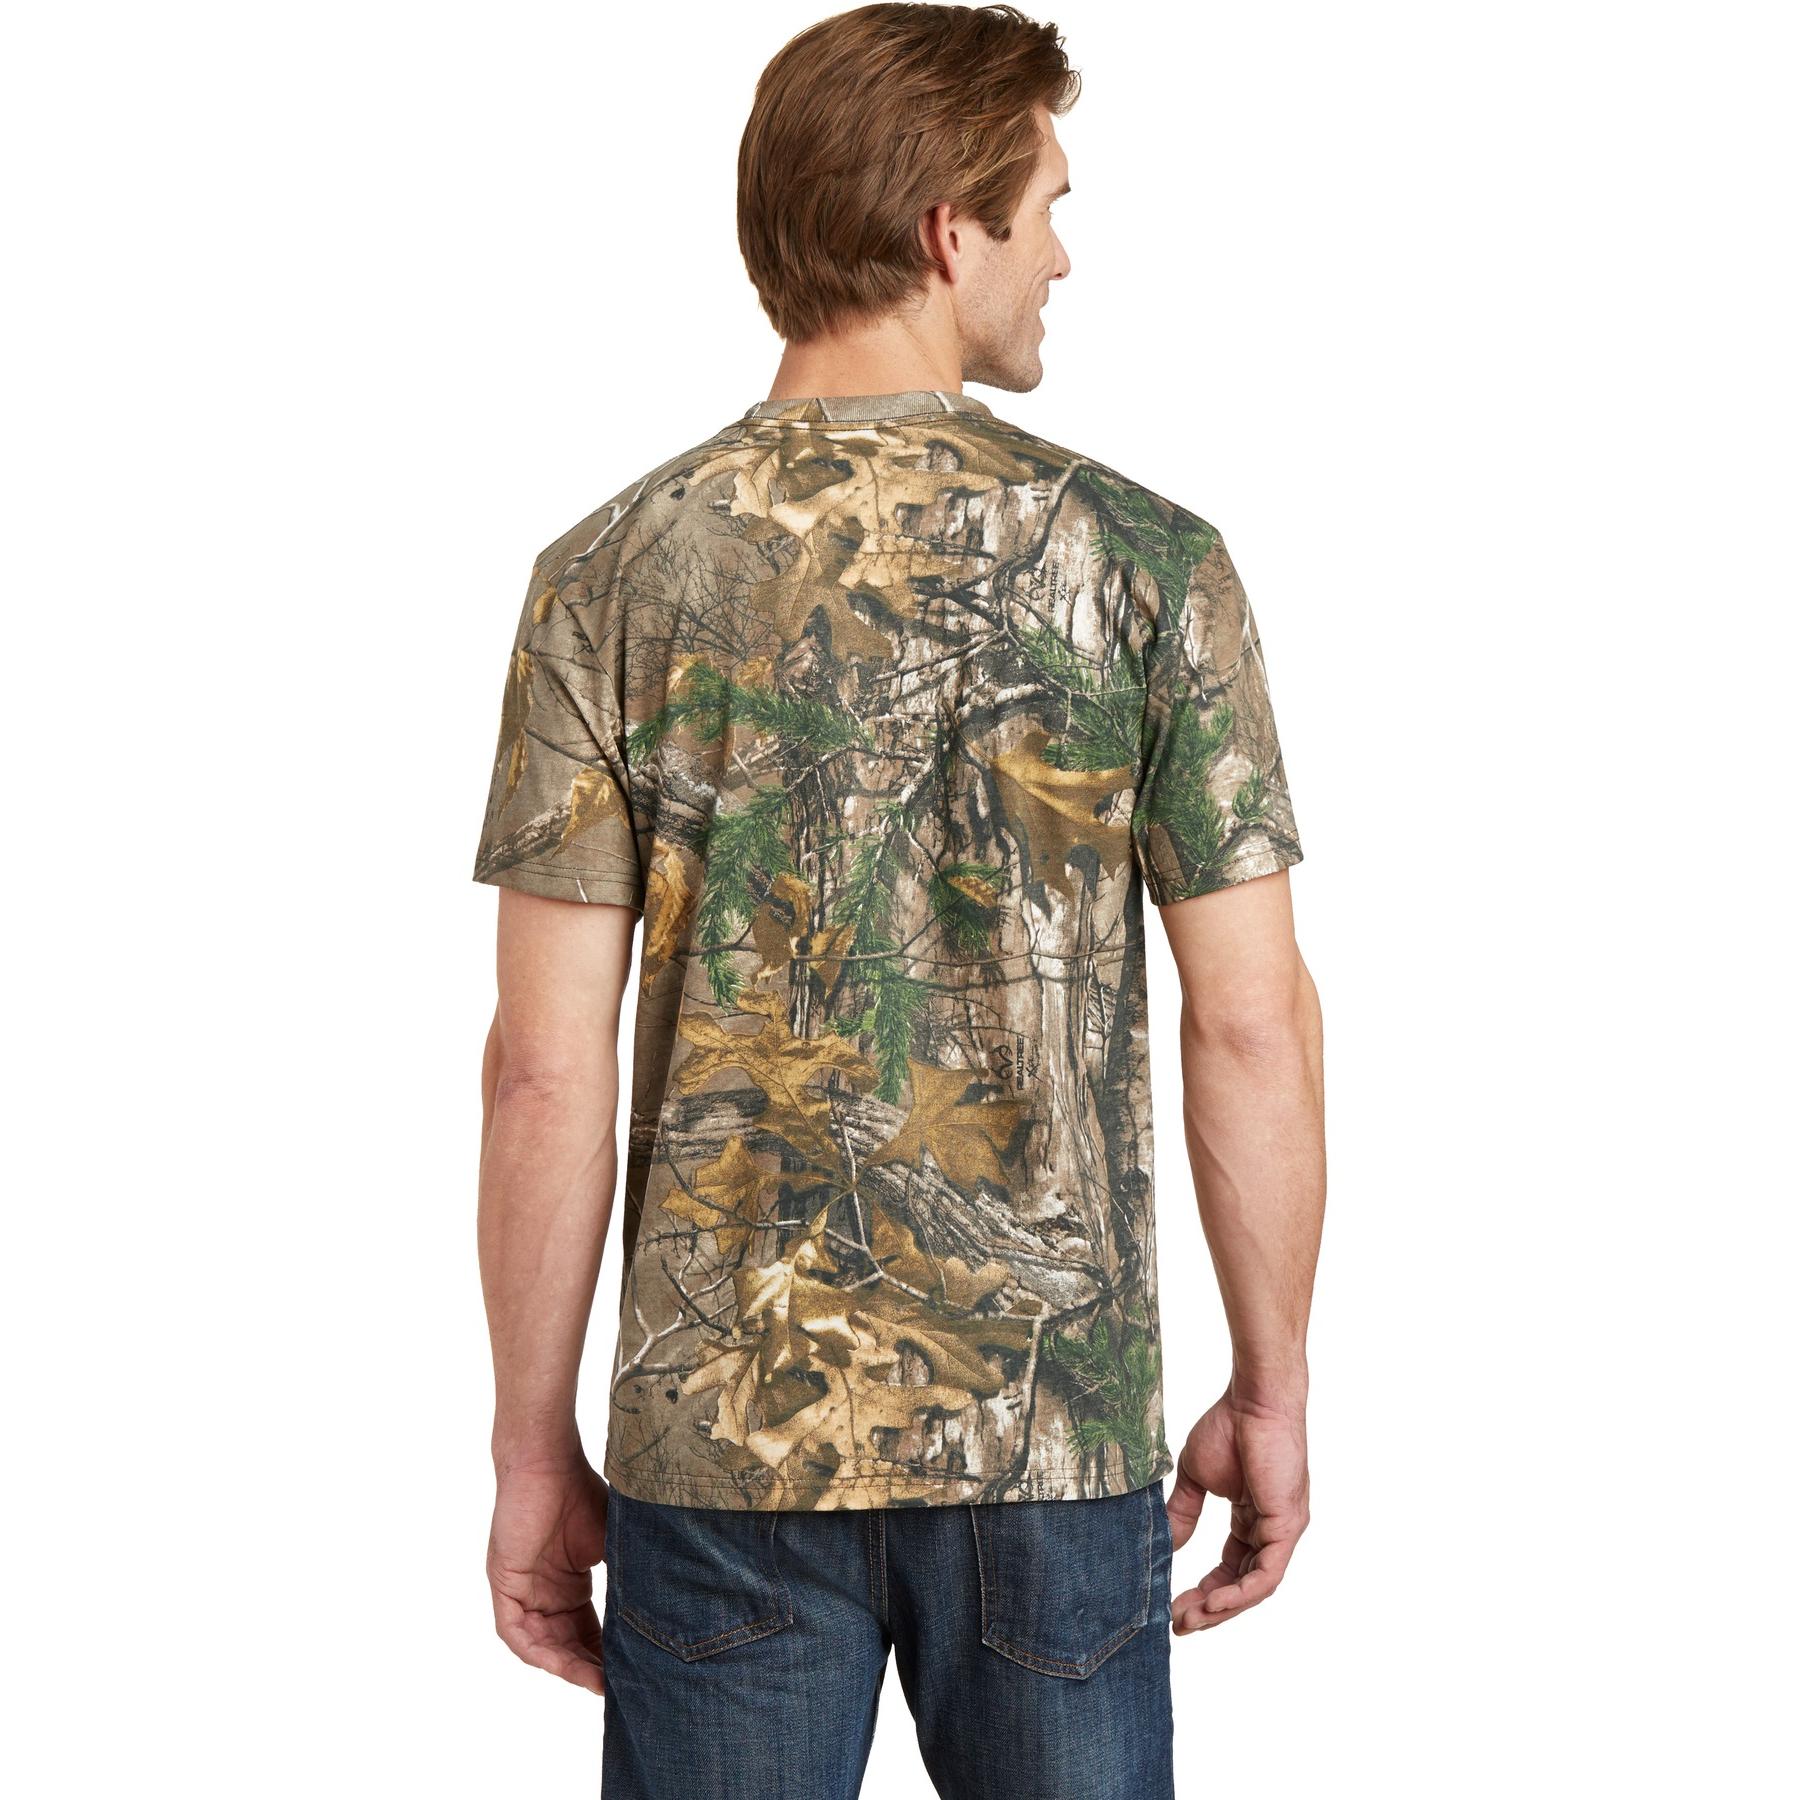 Russell Outdoors Mossy Oak Realtree Mens S-3XL 100% Cotton Pocket Camo T-shirts 